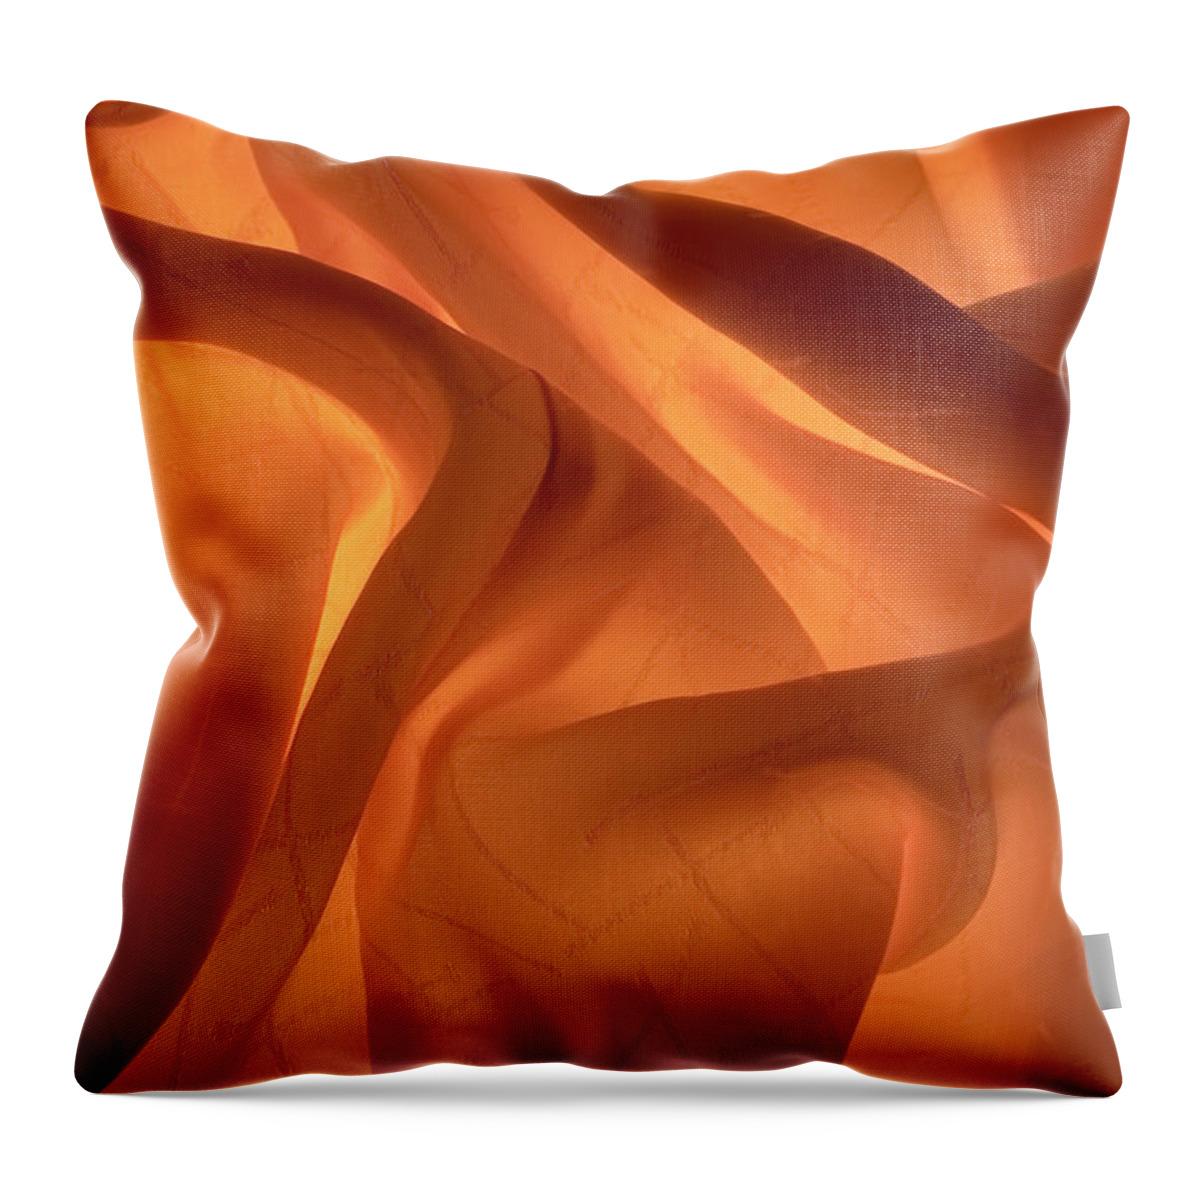 Shadow Throw Pillow featuring the photograph Gold Fiery Silk Fabric 1 by Jcarroll-images